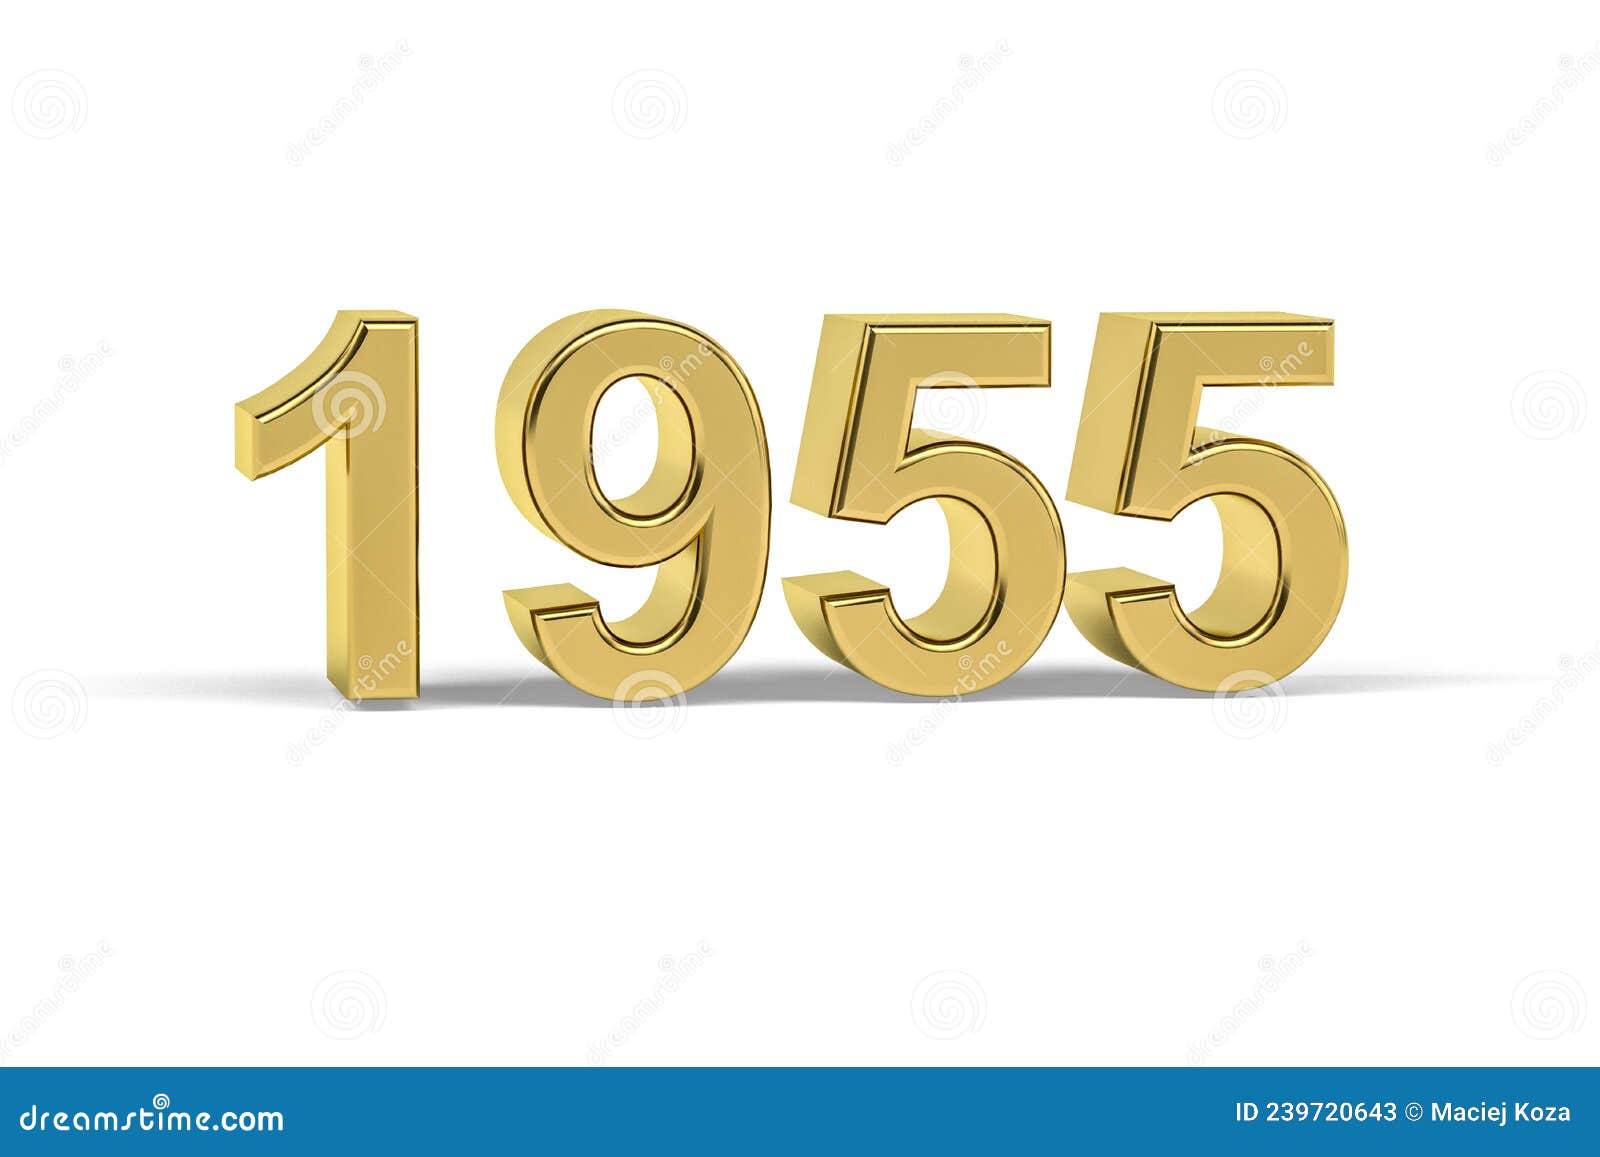 Golden 3d Number 1955 - Year 1955 Isolated on White ...